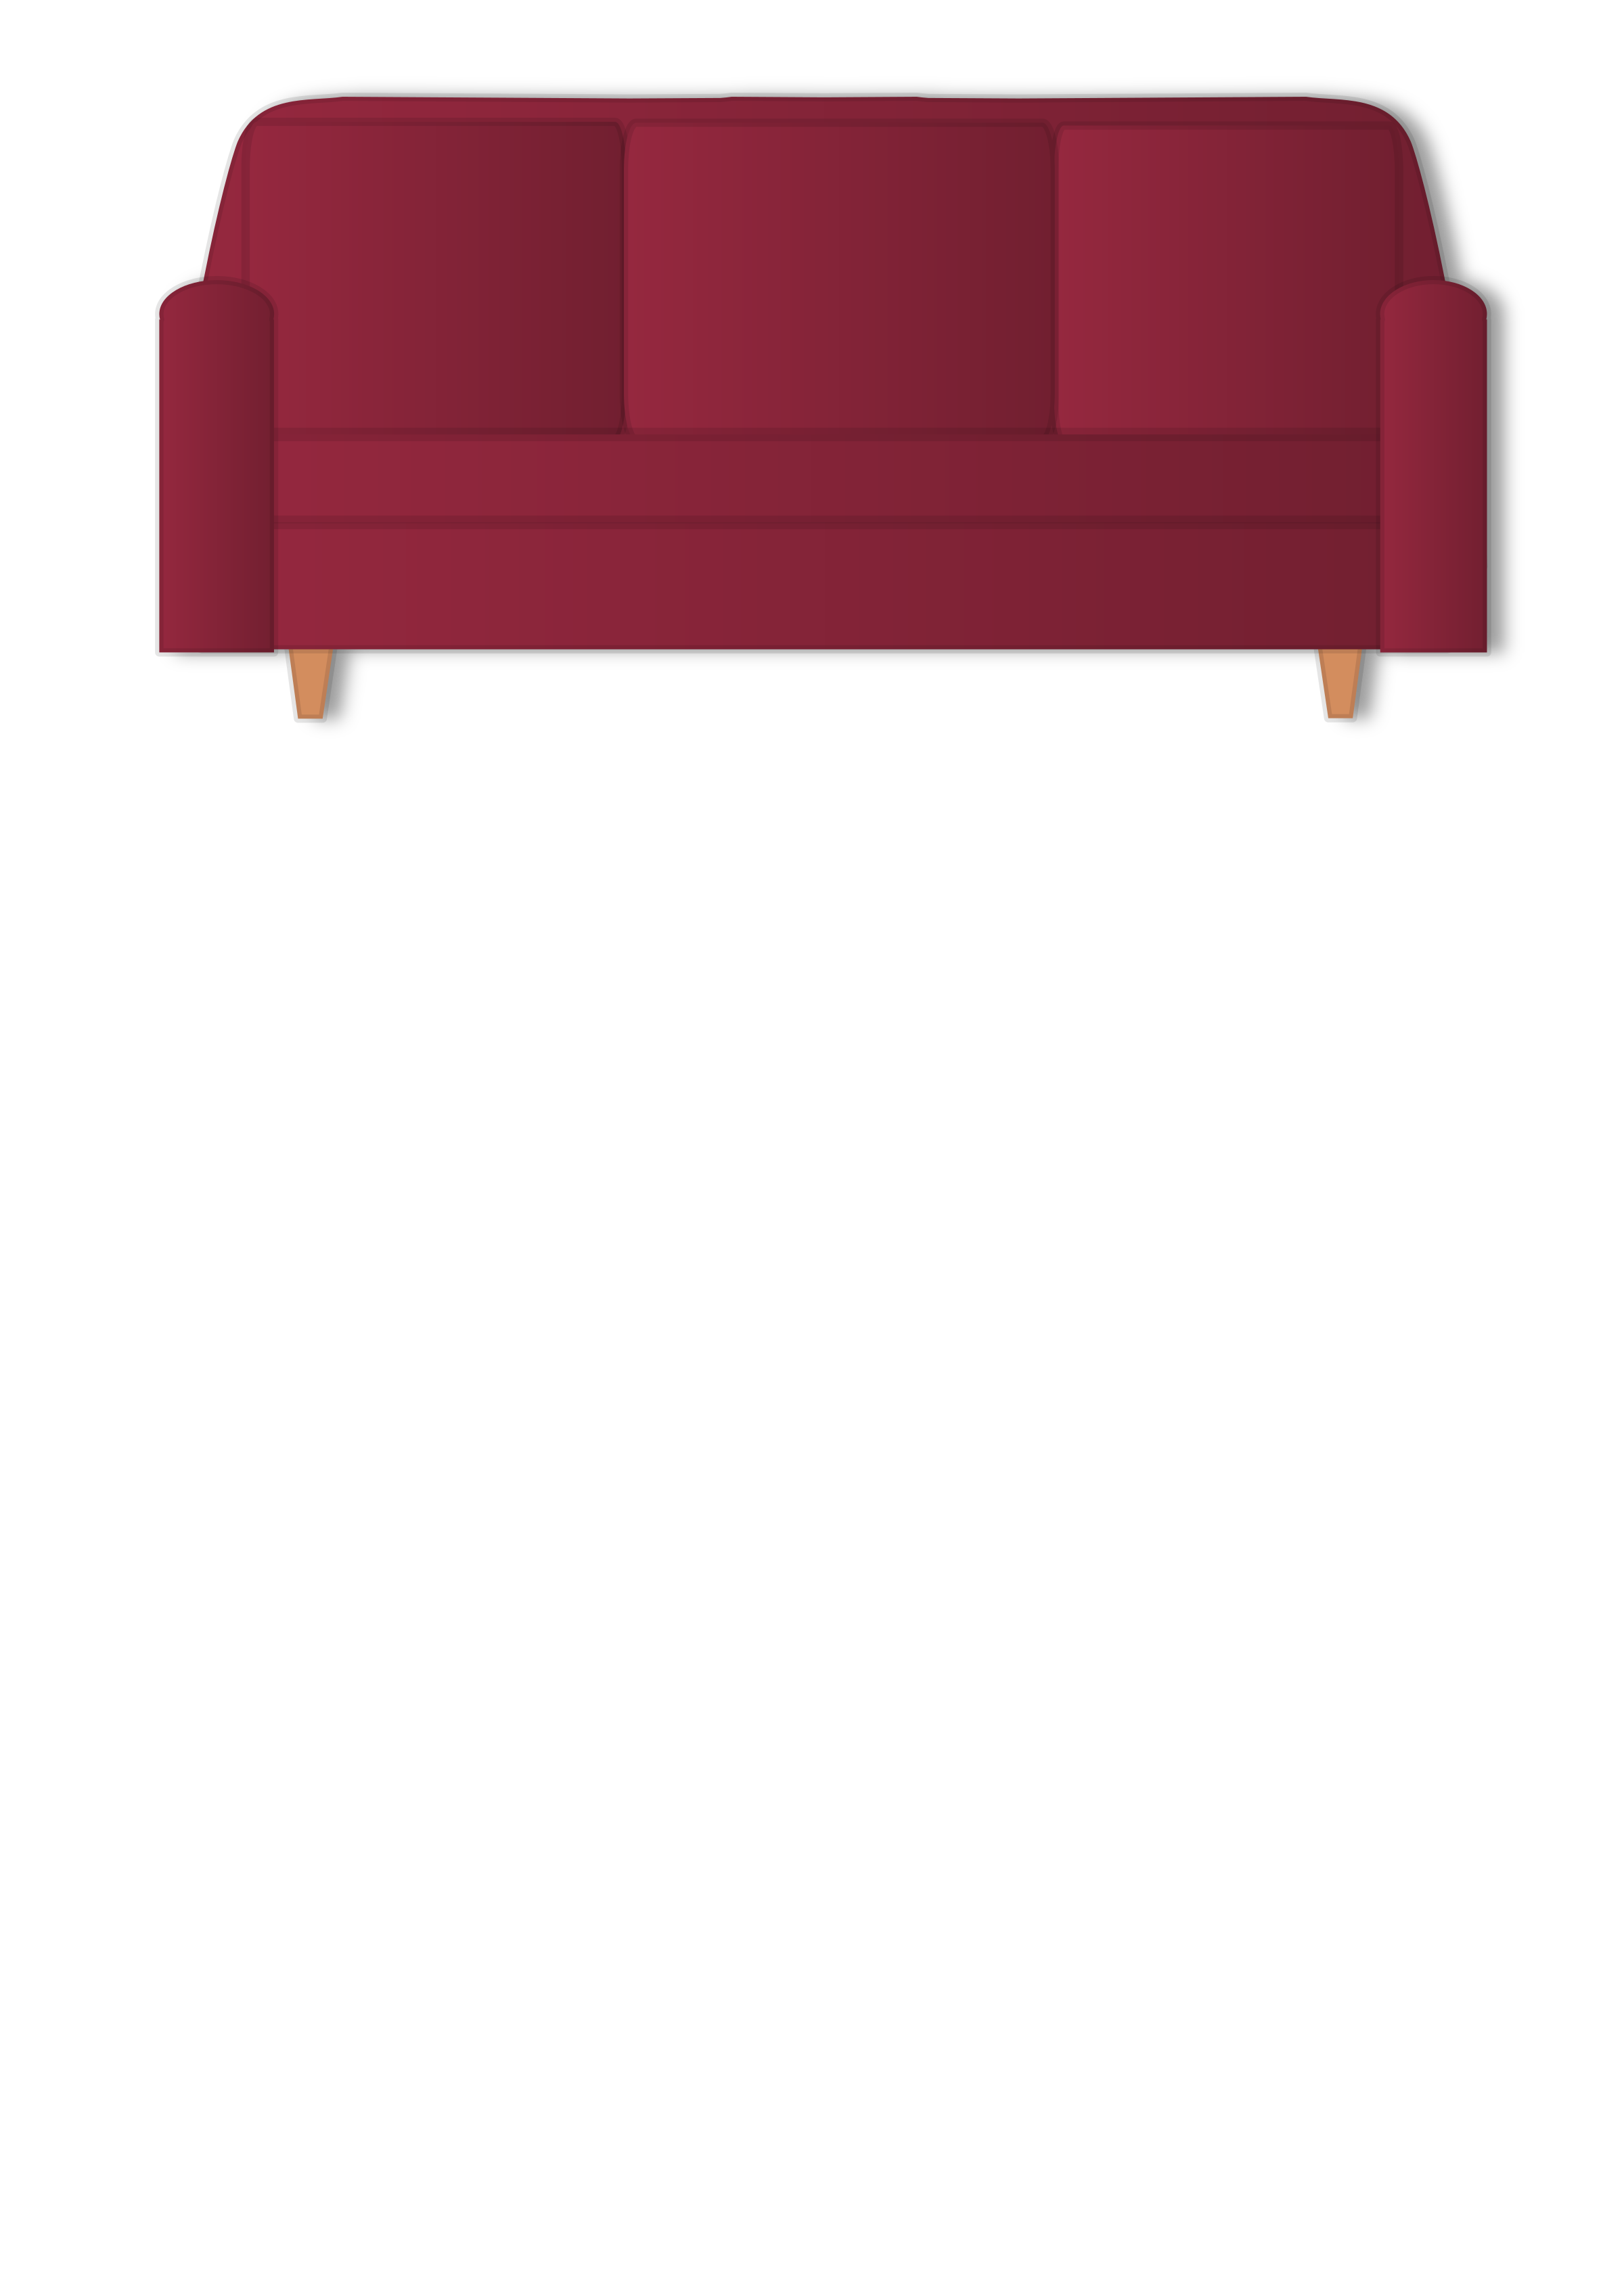 Red Couch By Yalnifj